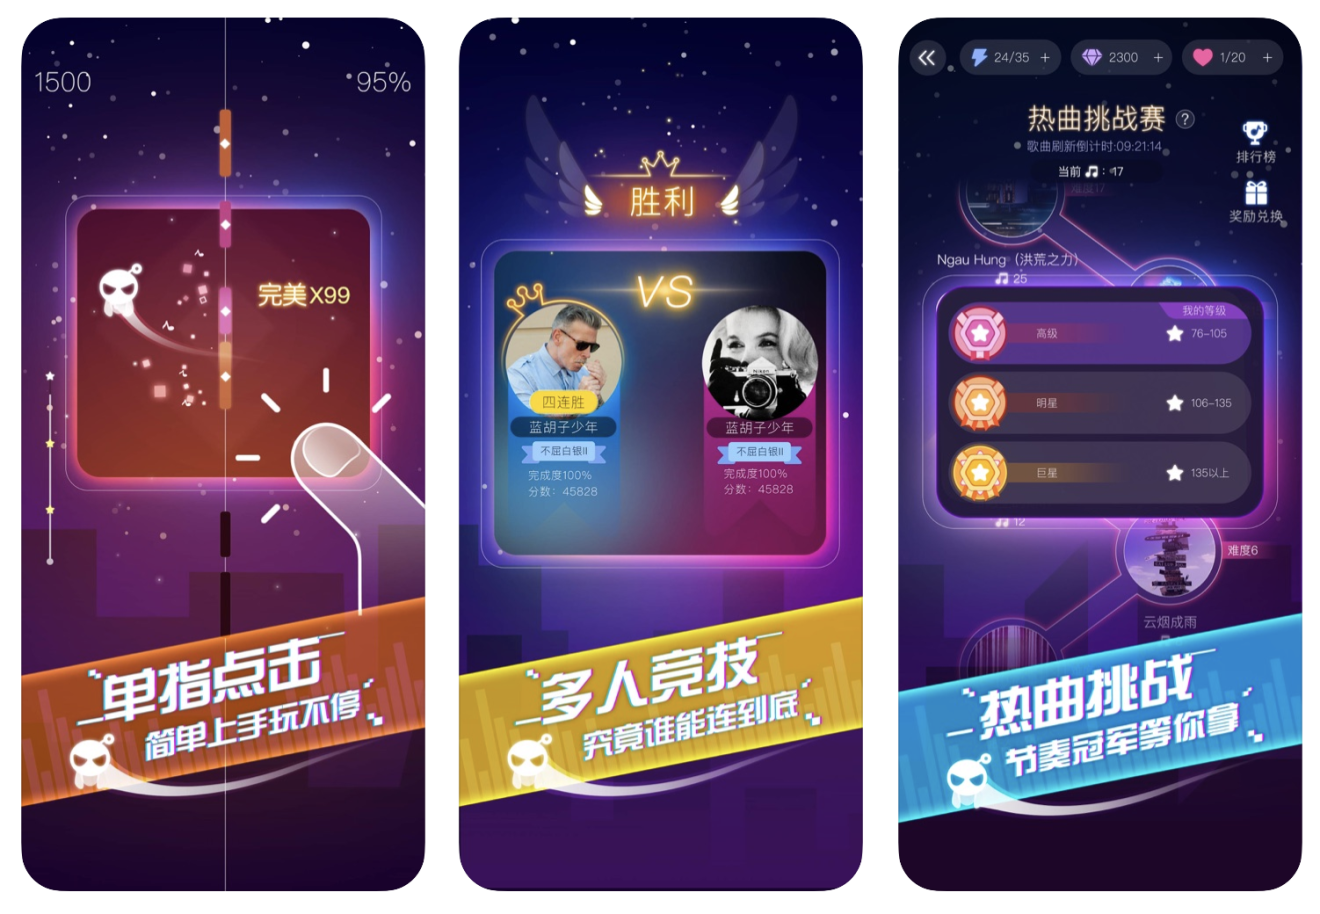 Yinyue Qiuqiu is one of China’s hottest music game apps this year. (Picture: Apple)